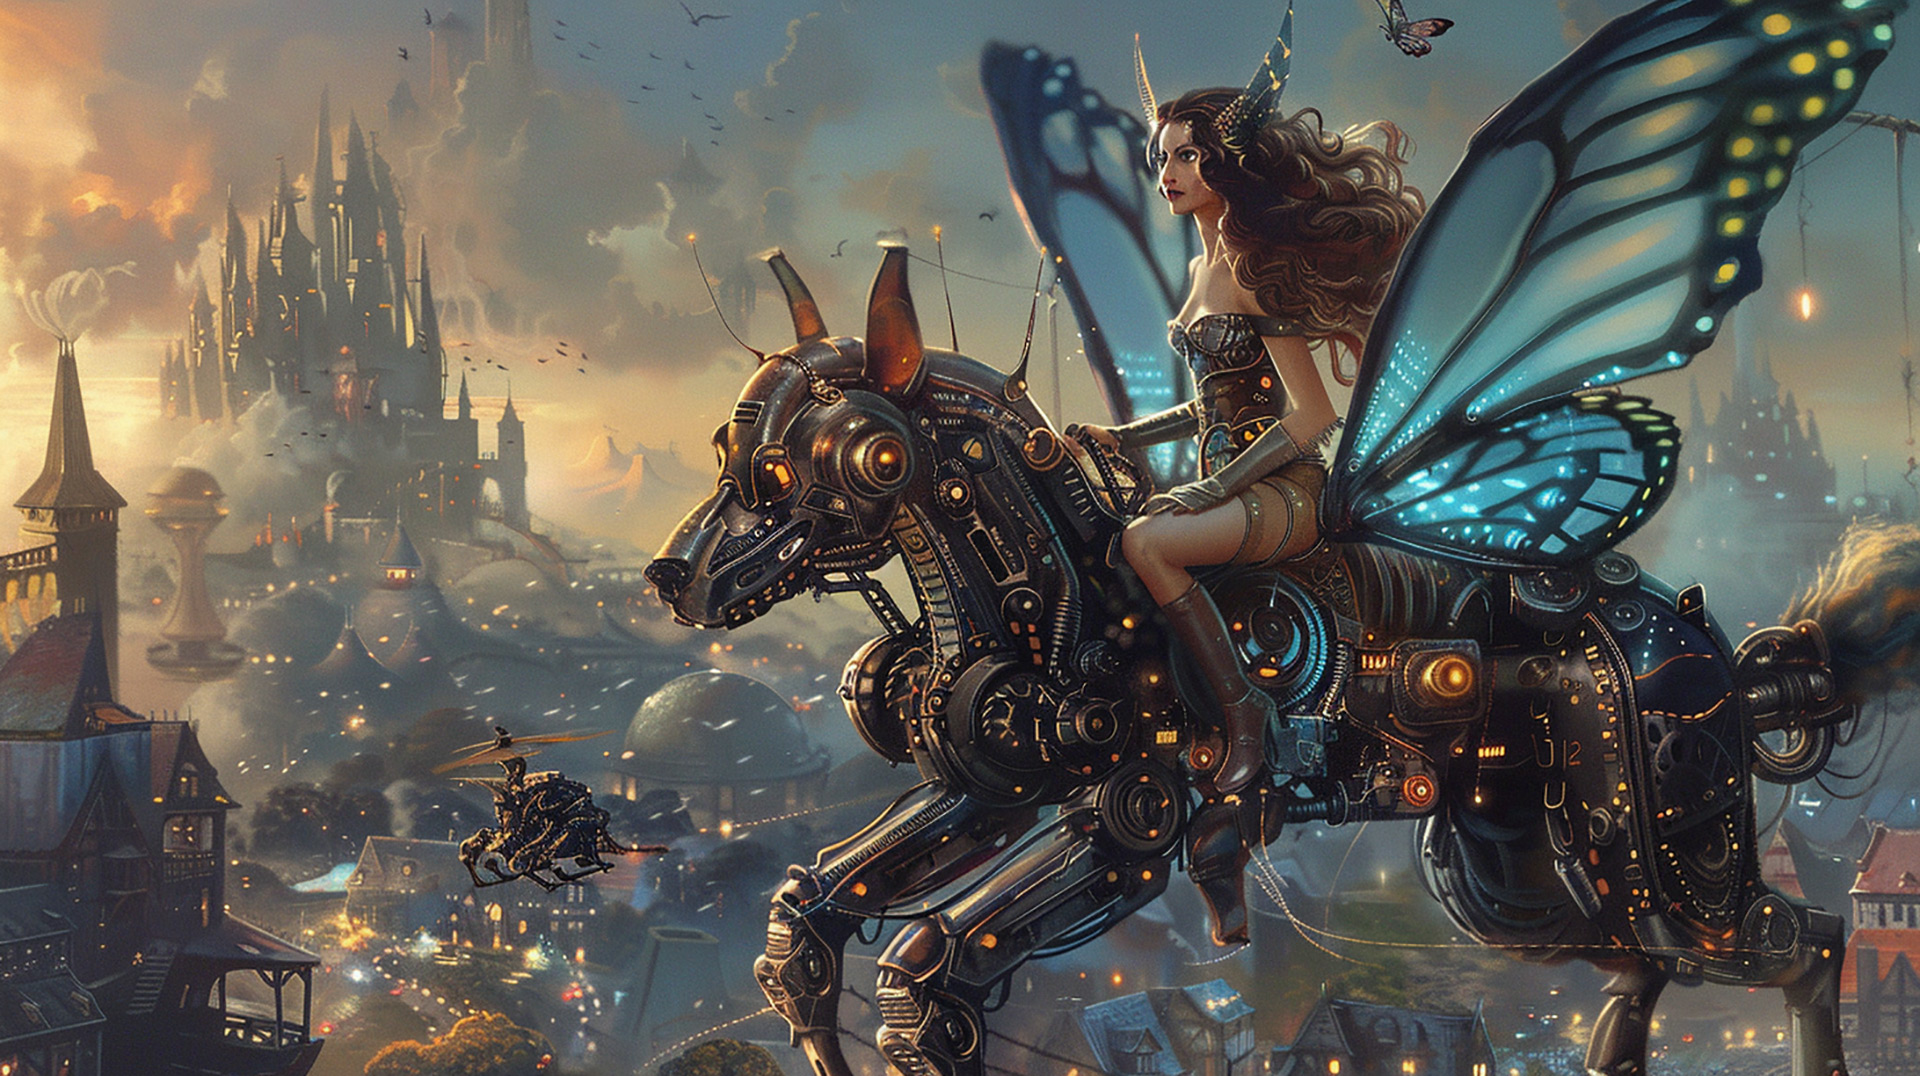 Fantasy Meets Technology: Flying Female Fairy and Robot Dog Art